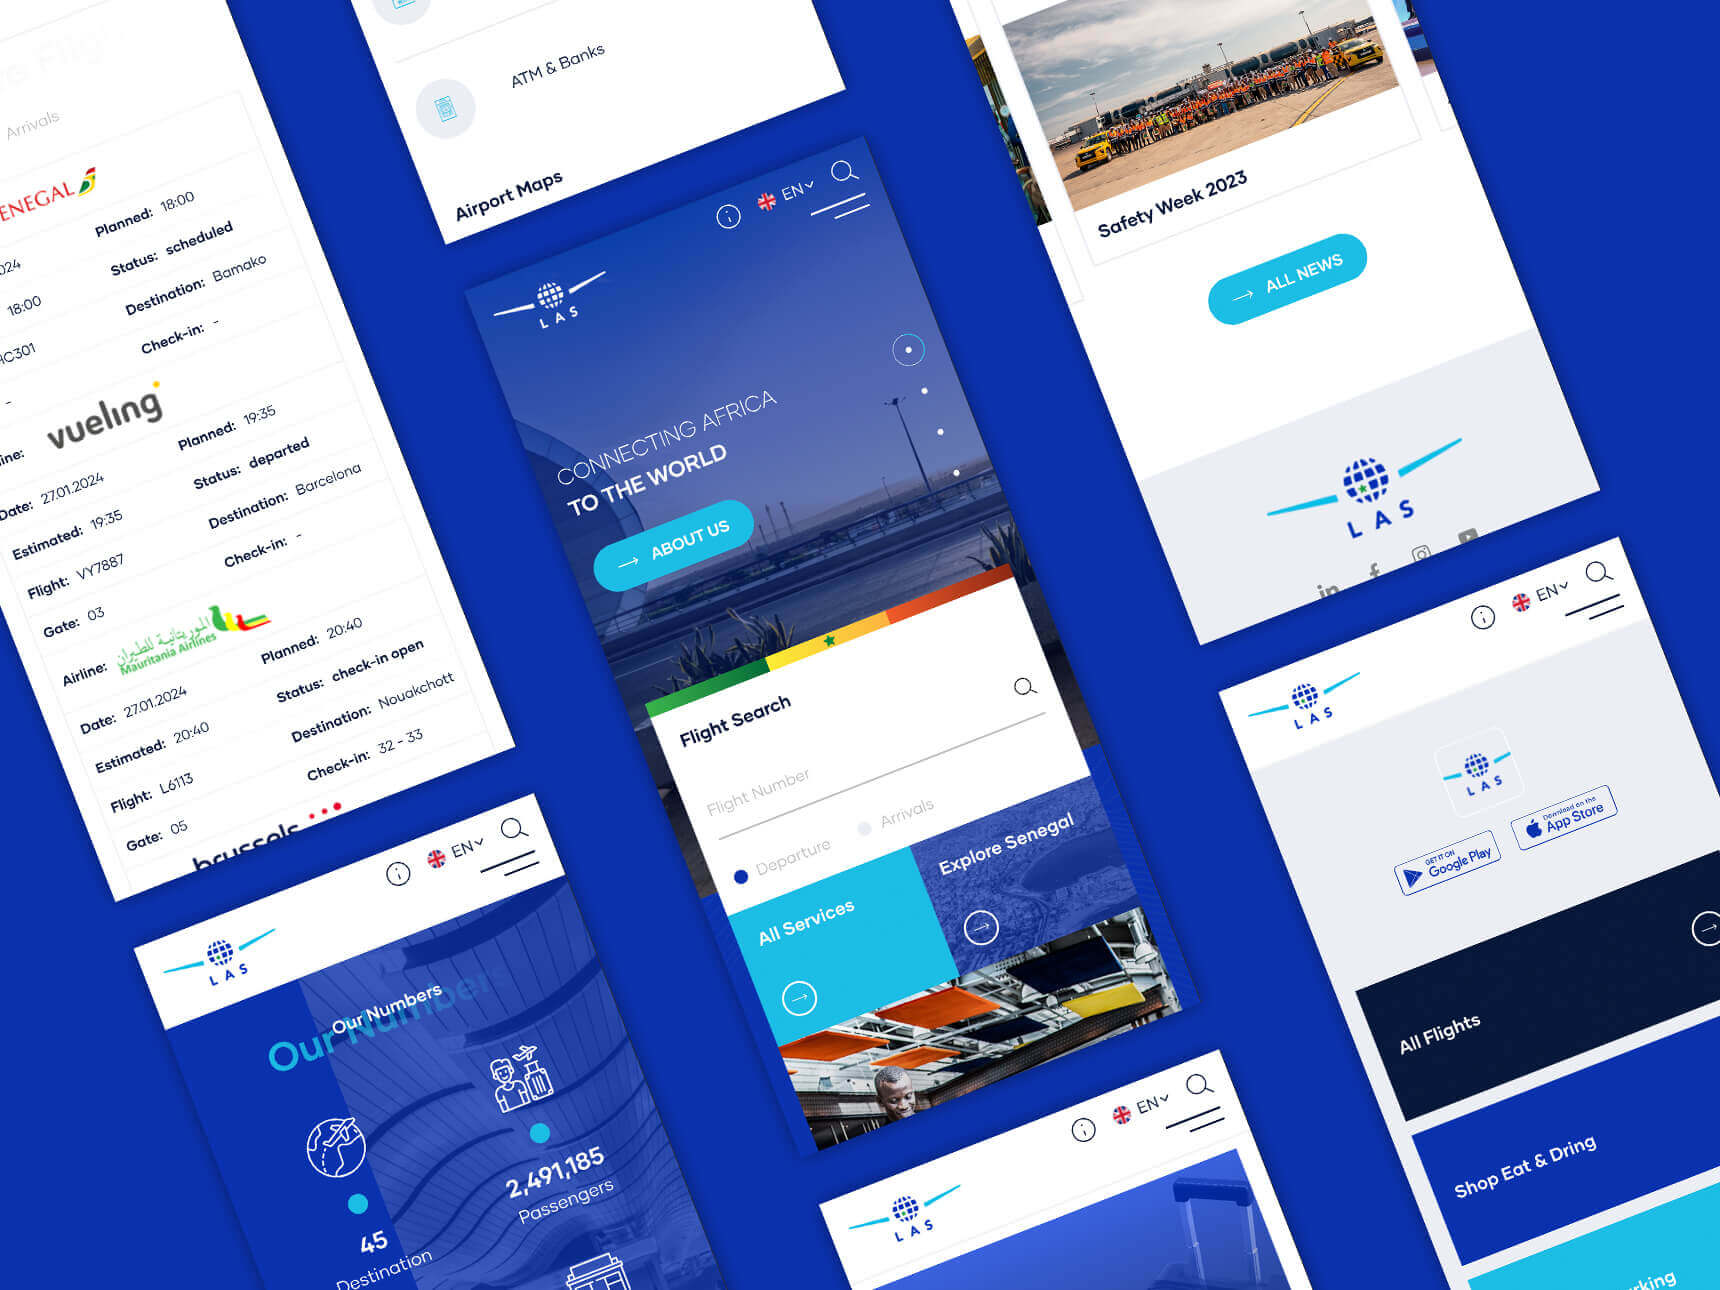 Dakar Aeroport-2 - wrinting 1-3 - web promo-5 - website-page-6 - app-mockup-7- home-page-8 - type-9 - color-10 - web-pages-11 - laptop-mockup-12 - mobil-page